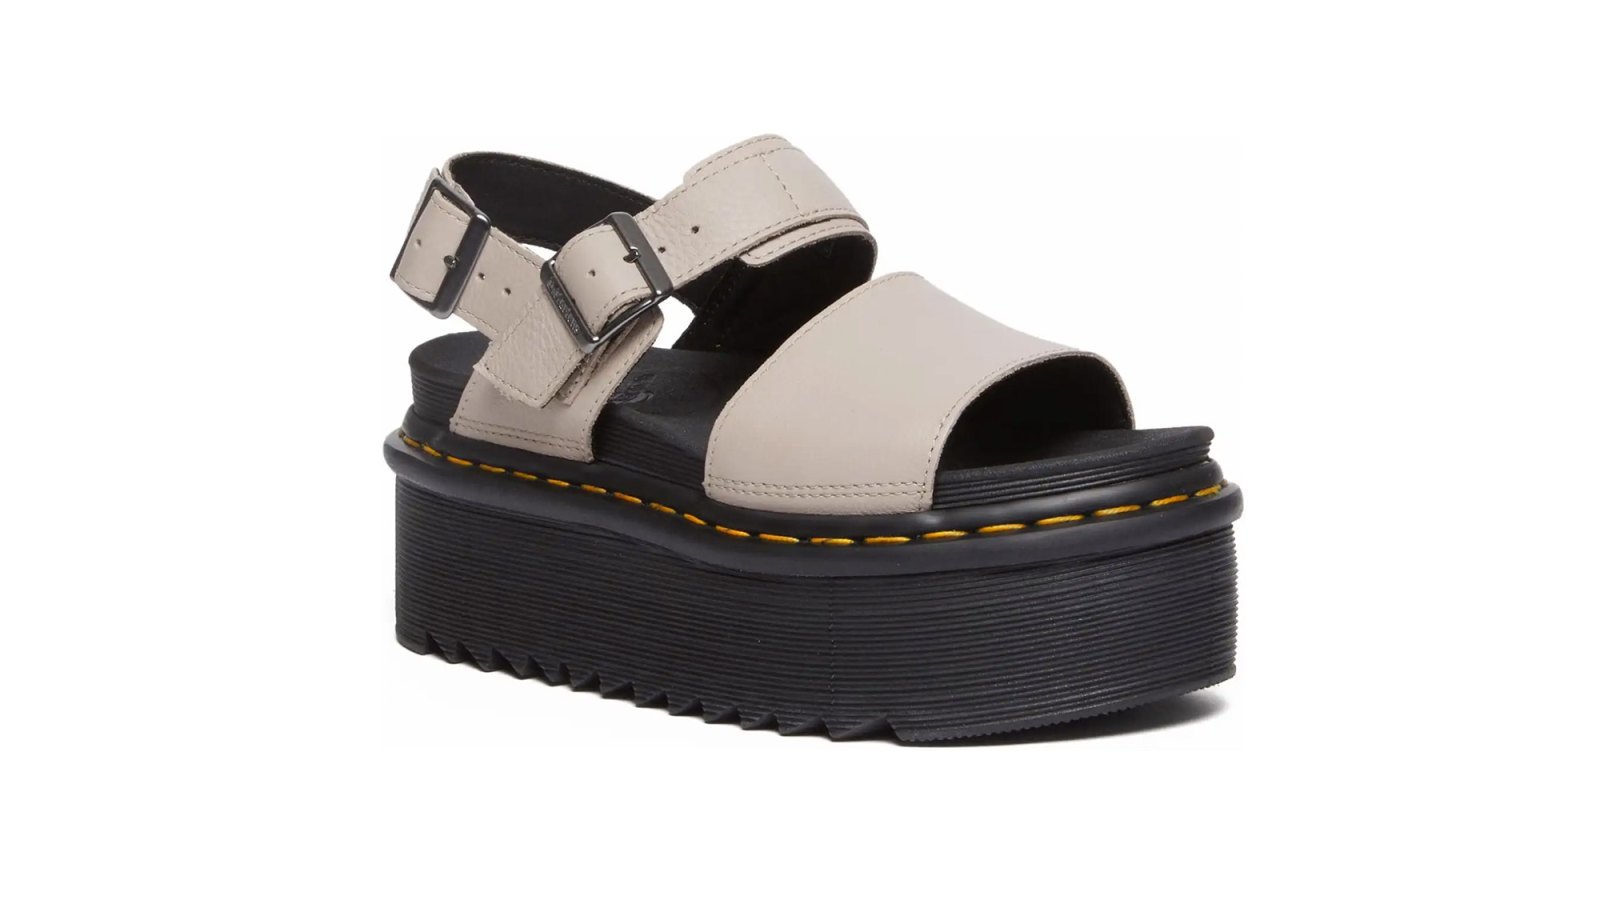 These Platform Dr. Martens Sandals Are 15% Off at Zappos | Us Weekly